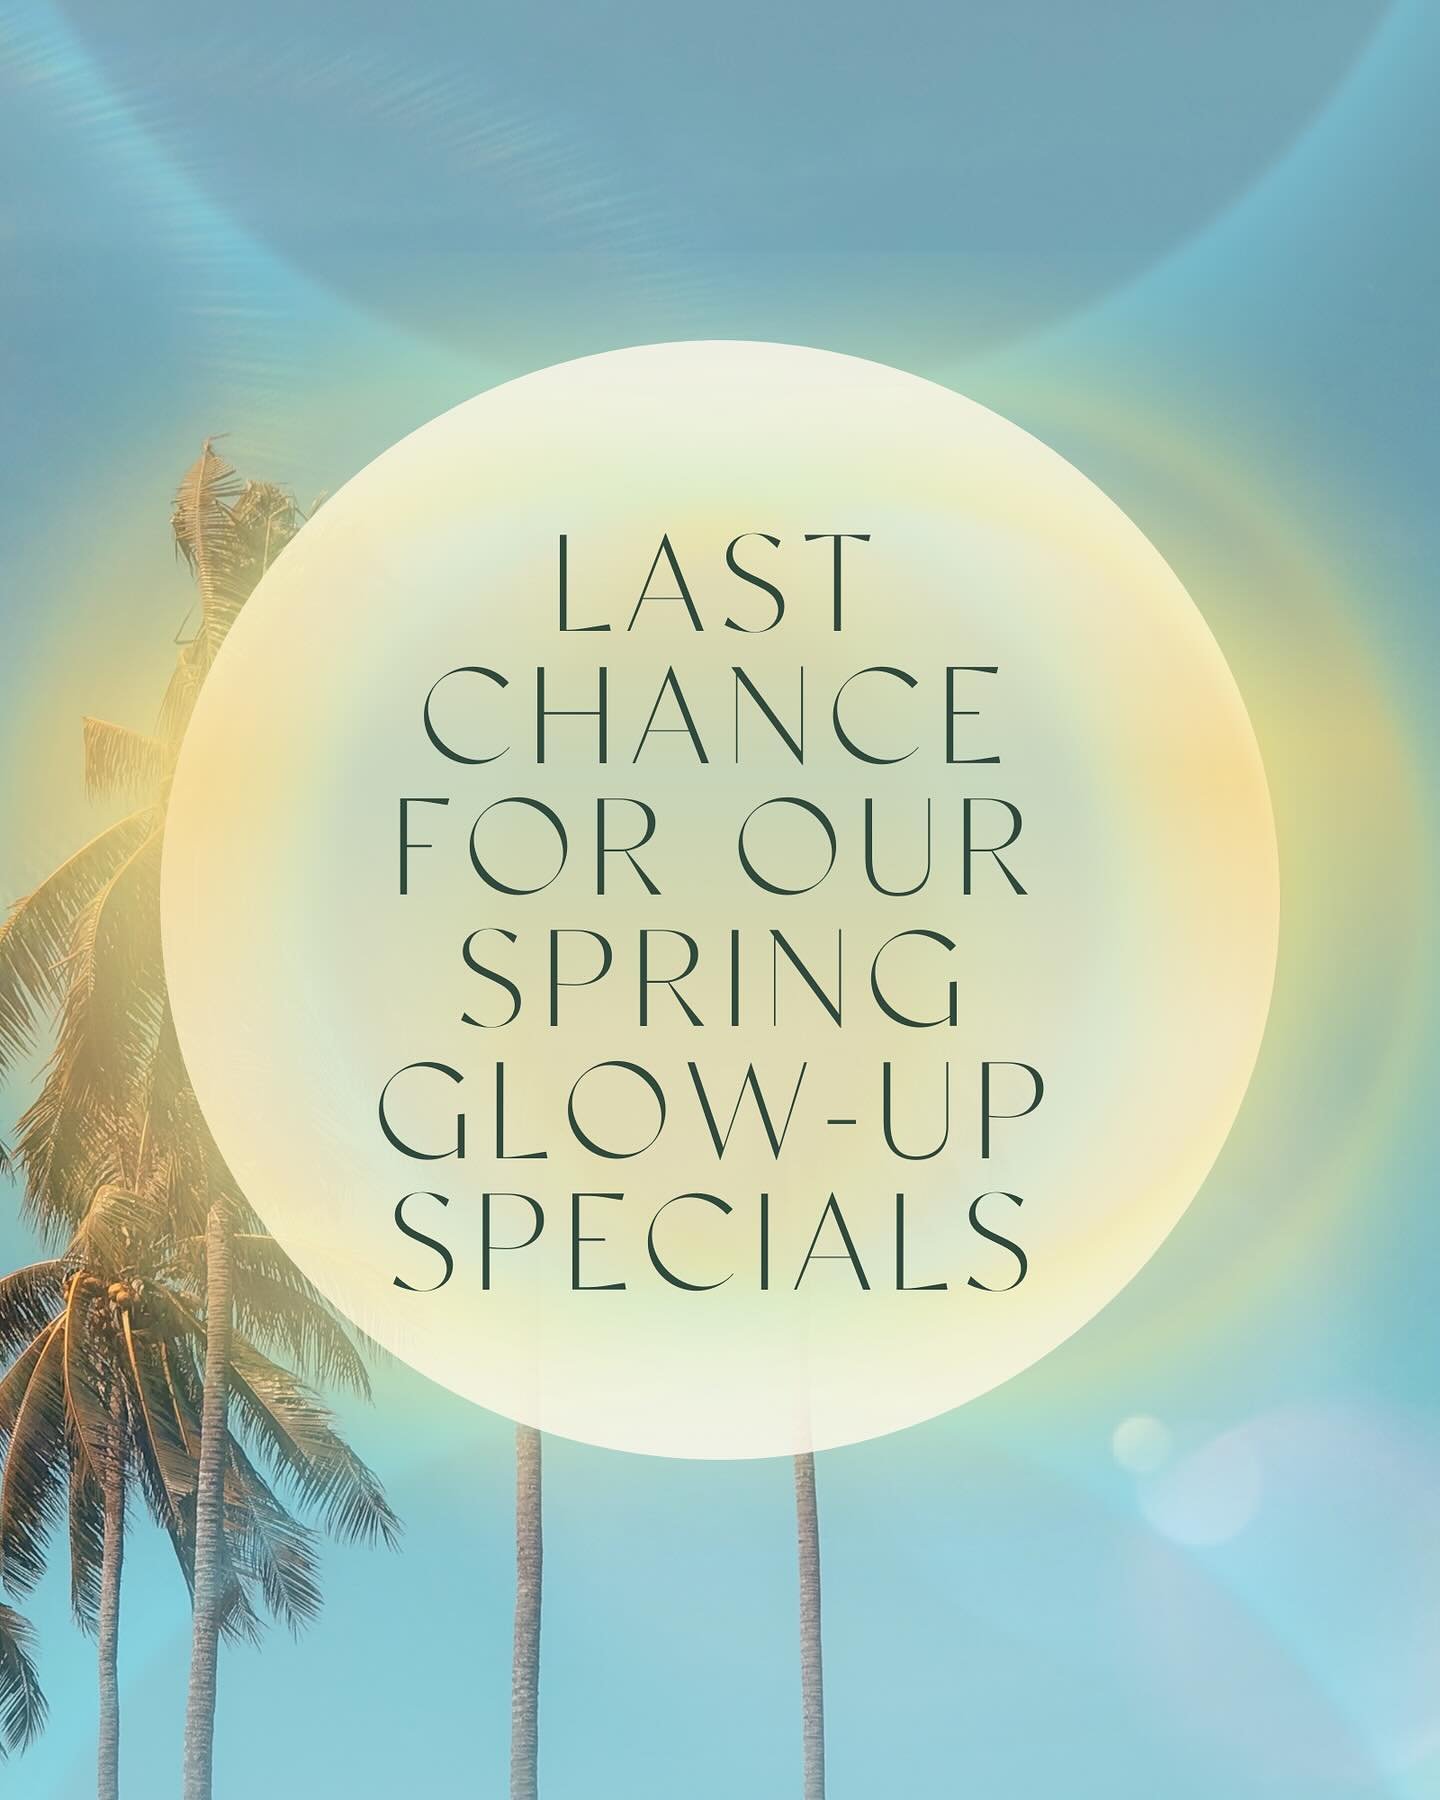 Last call for our Spring Glow-Up Specials! 🌴|

Don&rsquo;t miss out on deepening your wellness, getting summer-ready + benefiting from perks including 
☀️ Year-long validity
☀️ Shareable services
☀️ HSA + FSA acceptance

Time&rsquo;s running out, so